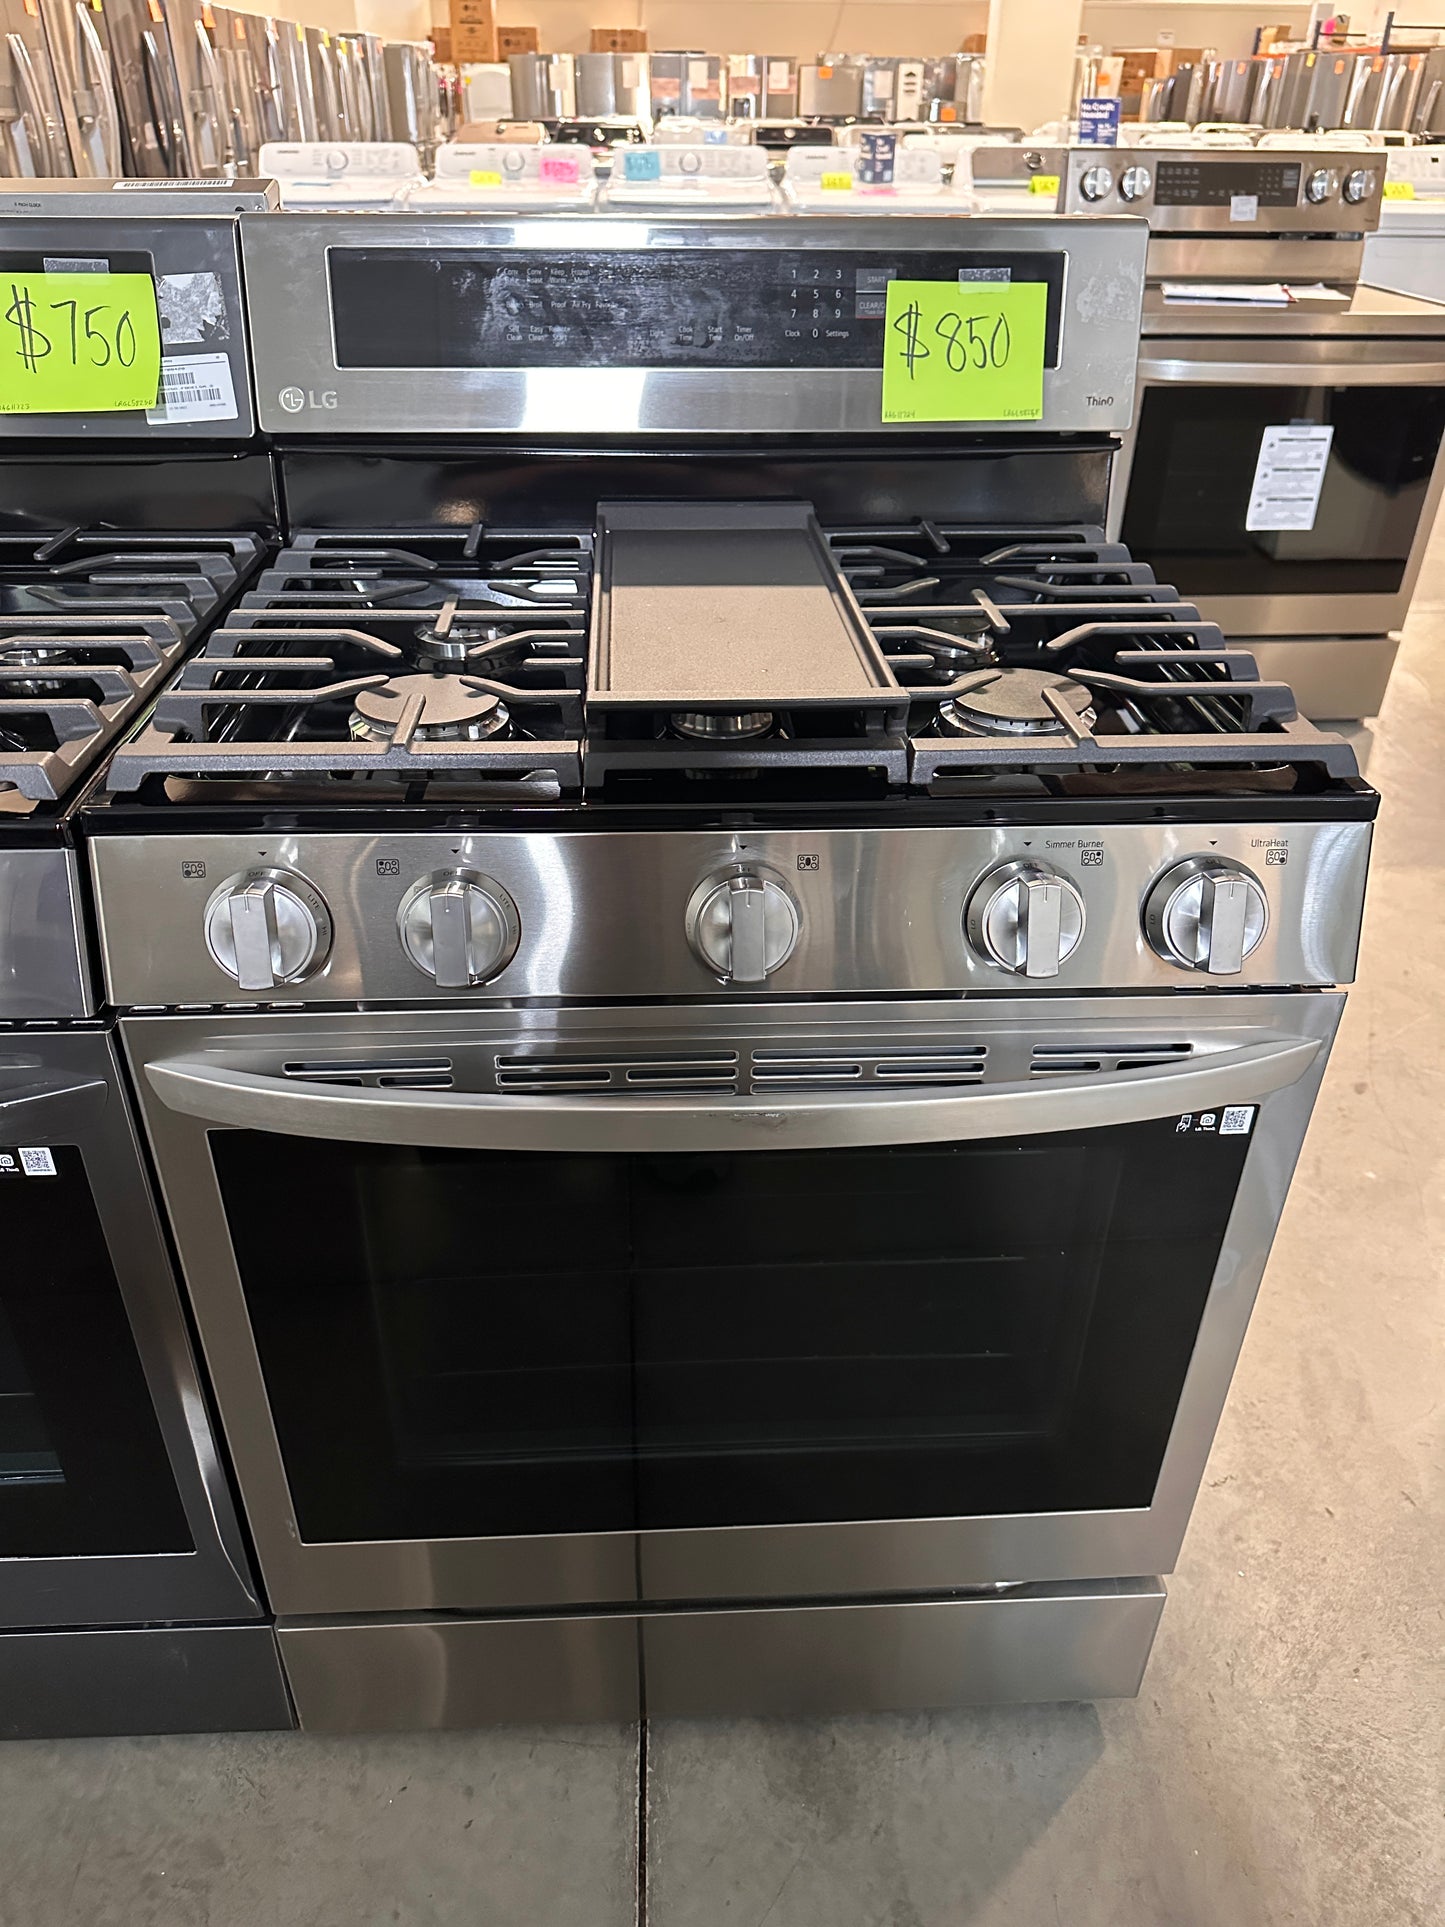 NEW GAS TRUE CONVECTION LG RANGE WITH EASYCLEAN - RAG11724